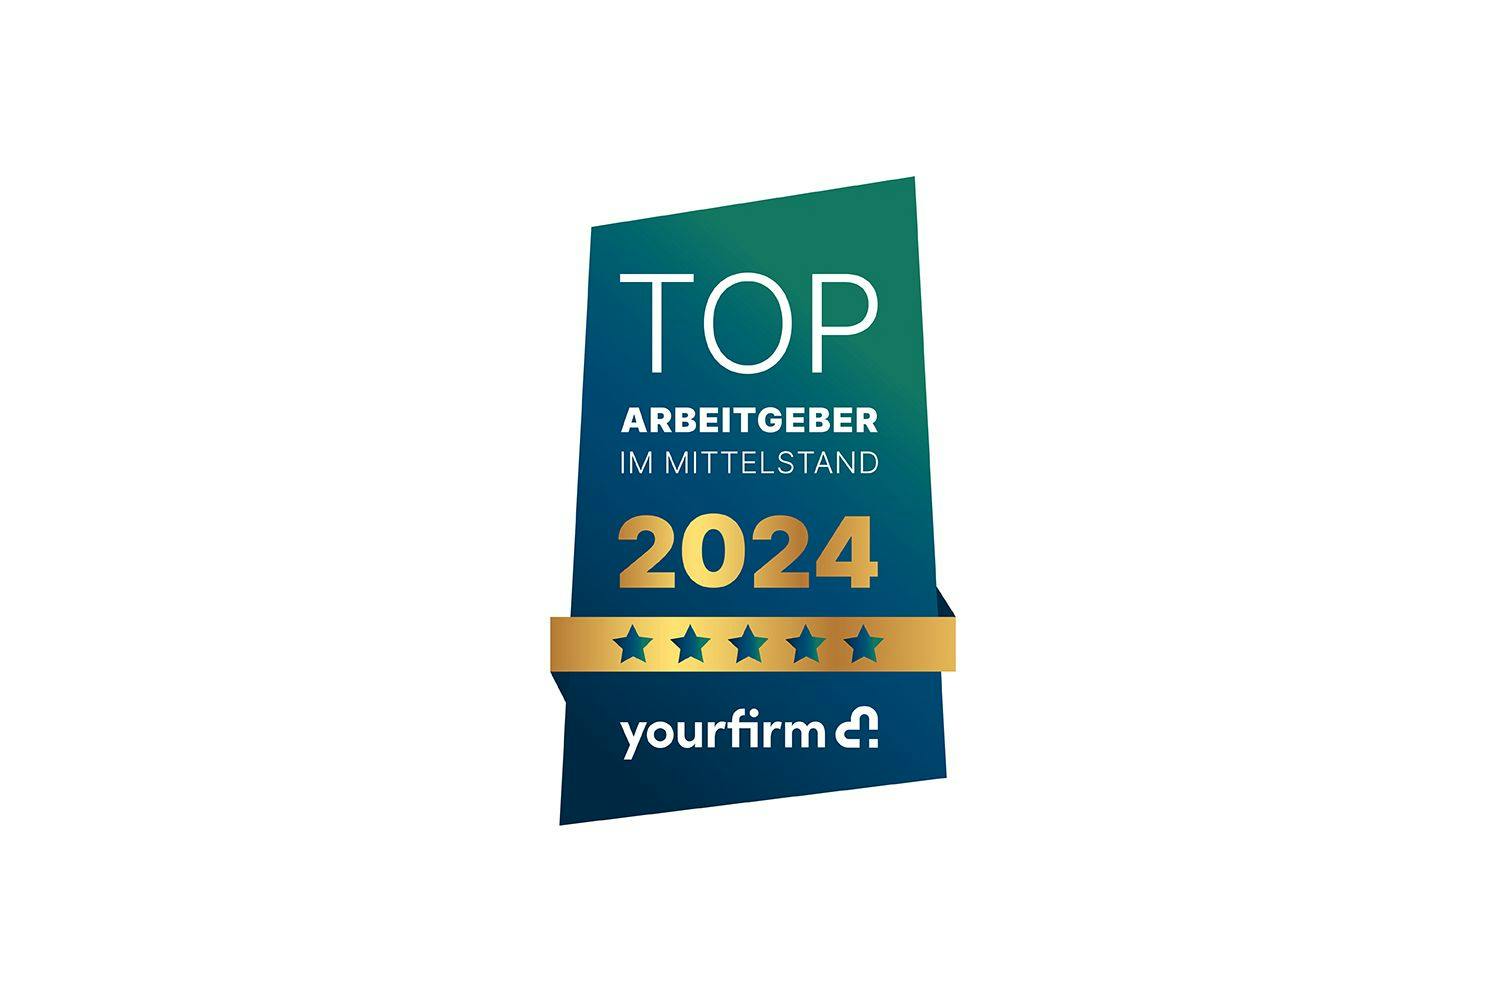  Top employer in Medium-sized businesses 2024